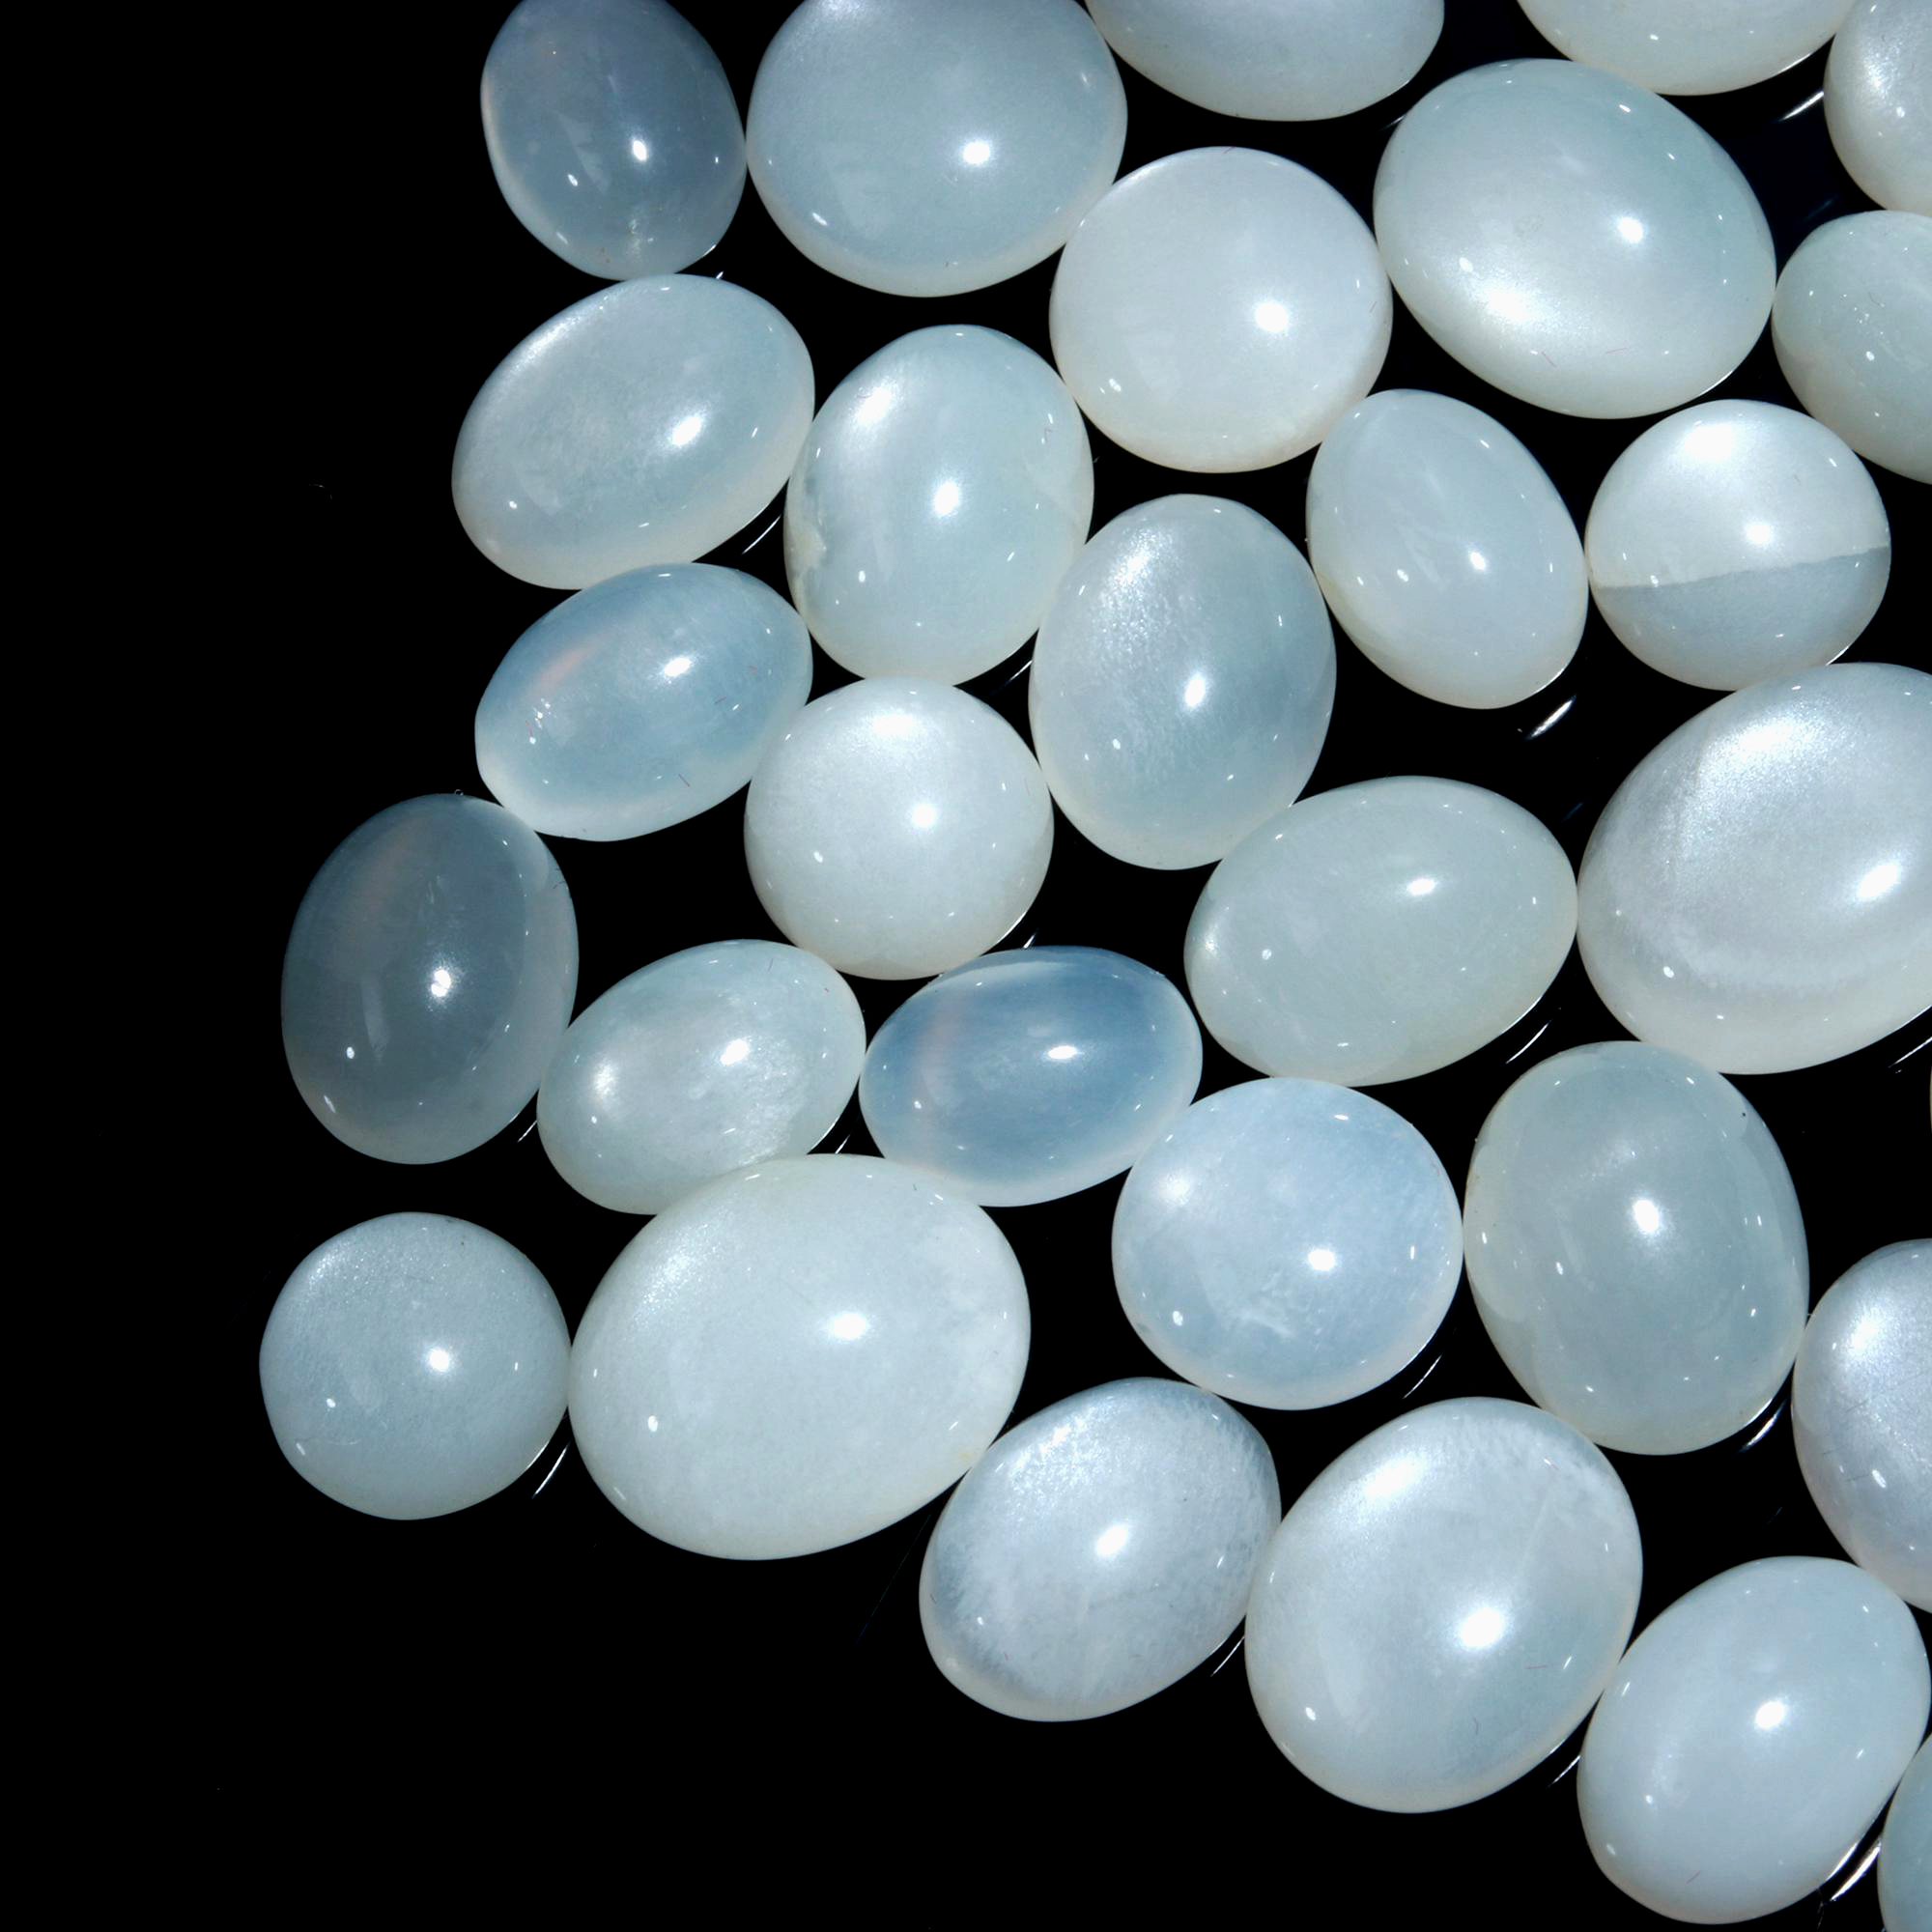 53 Pcs. 98Cts. Natural White Rainbow Moonstone polished Mix Cabochon Wholesale Loose Lot Size 10x7 6x6mm Gemstone for jewelry